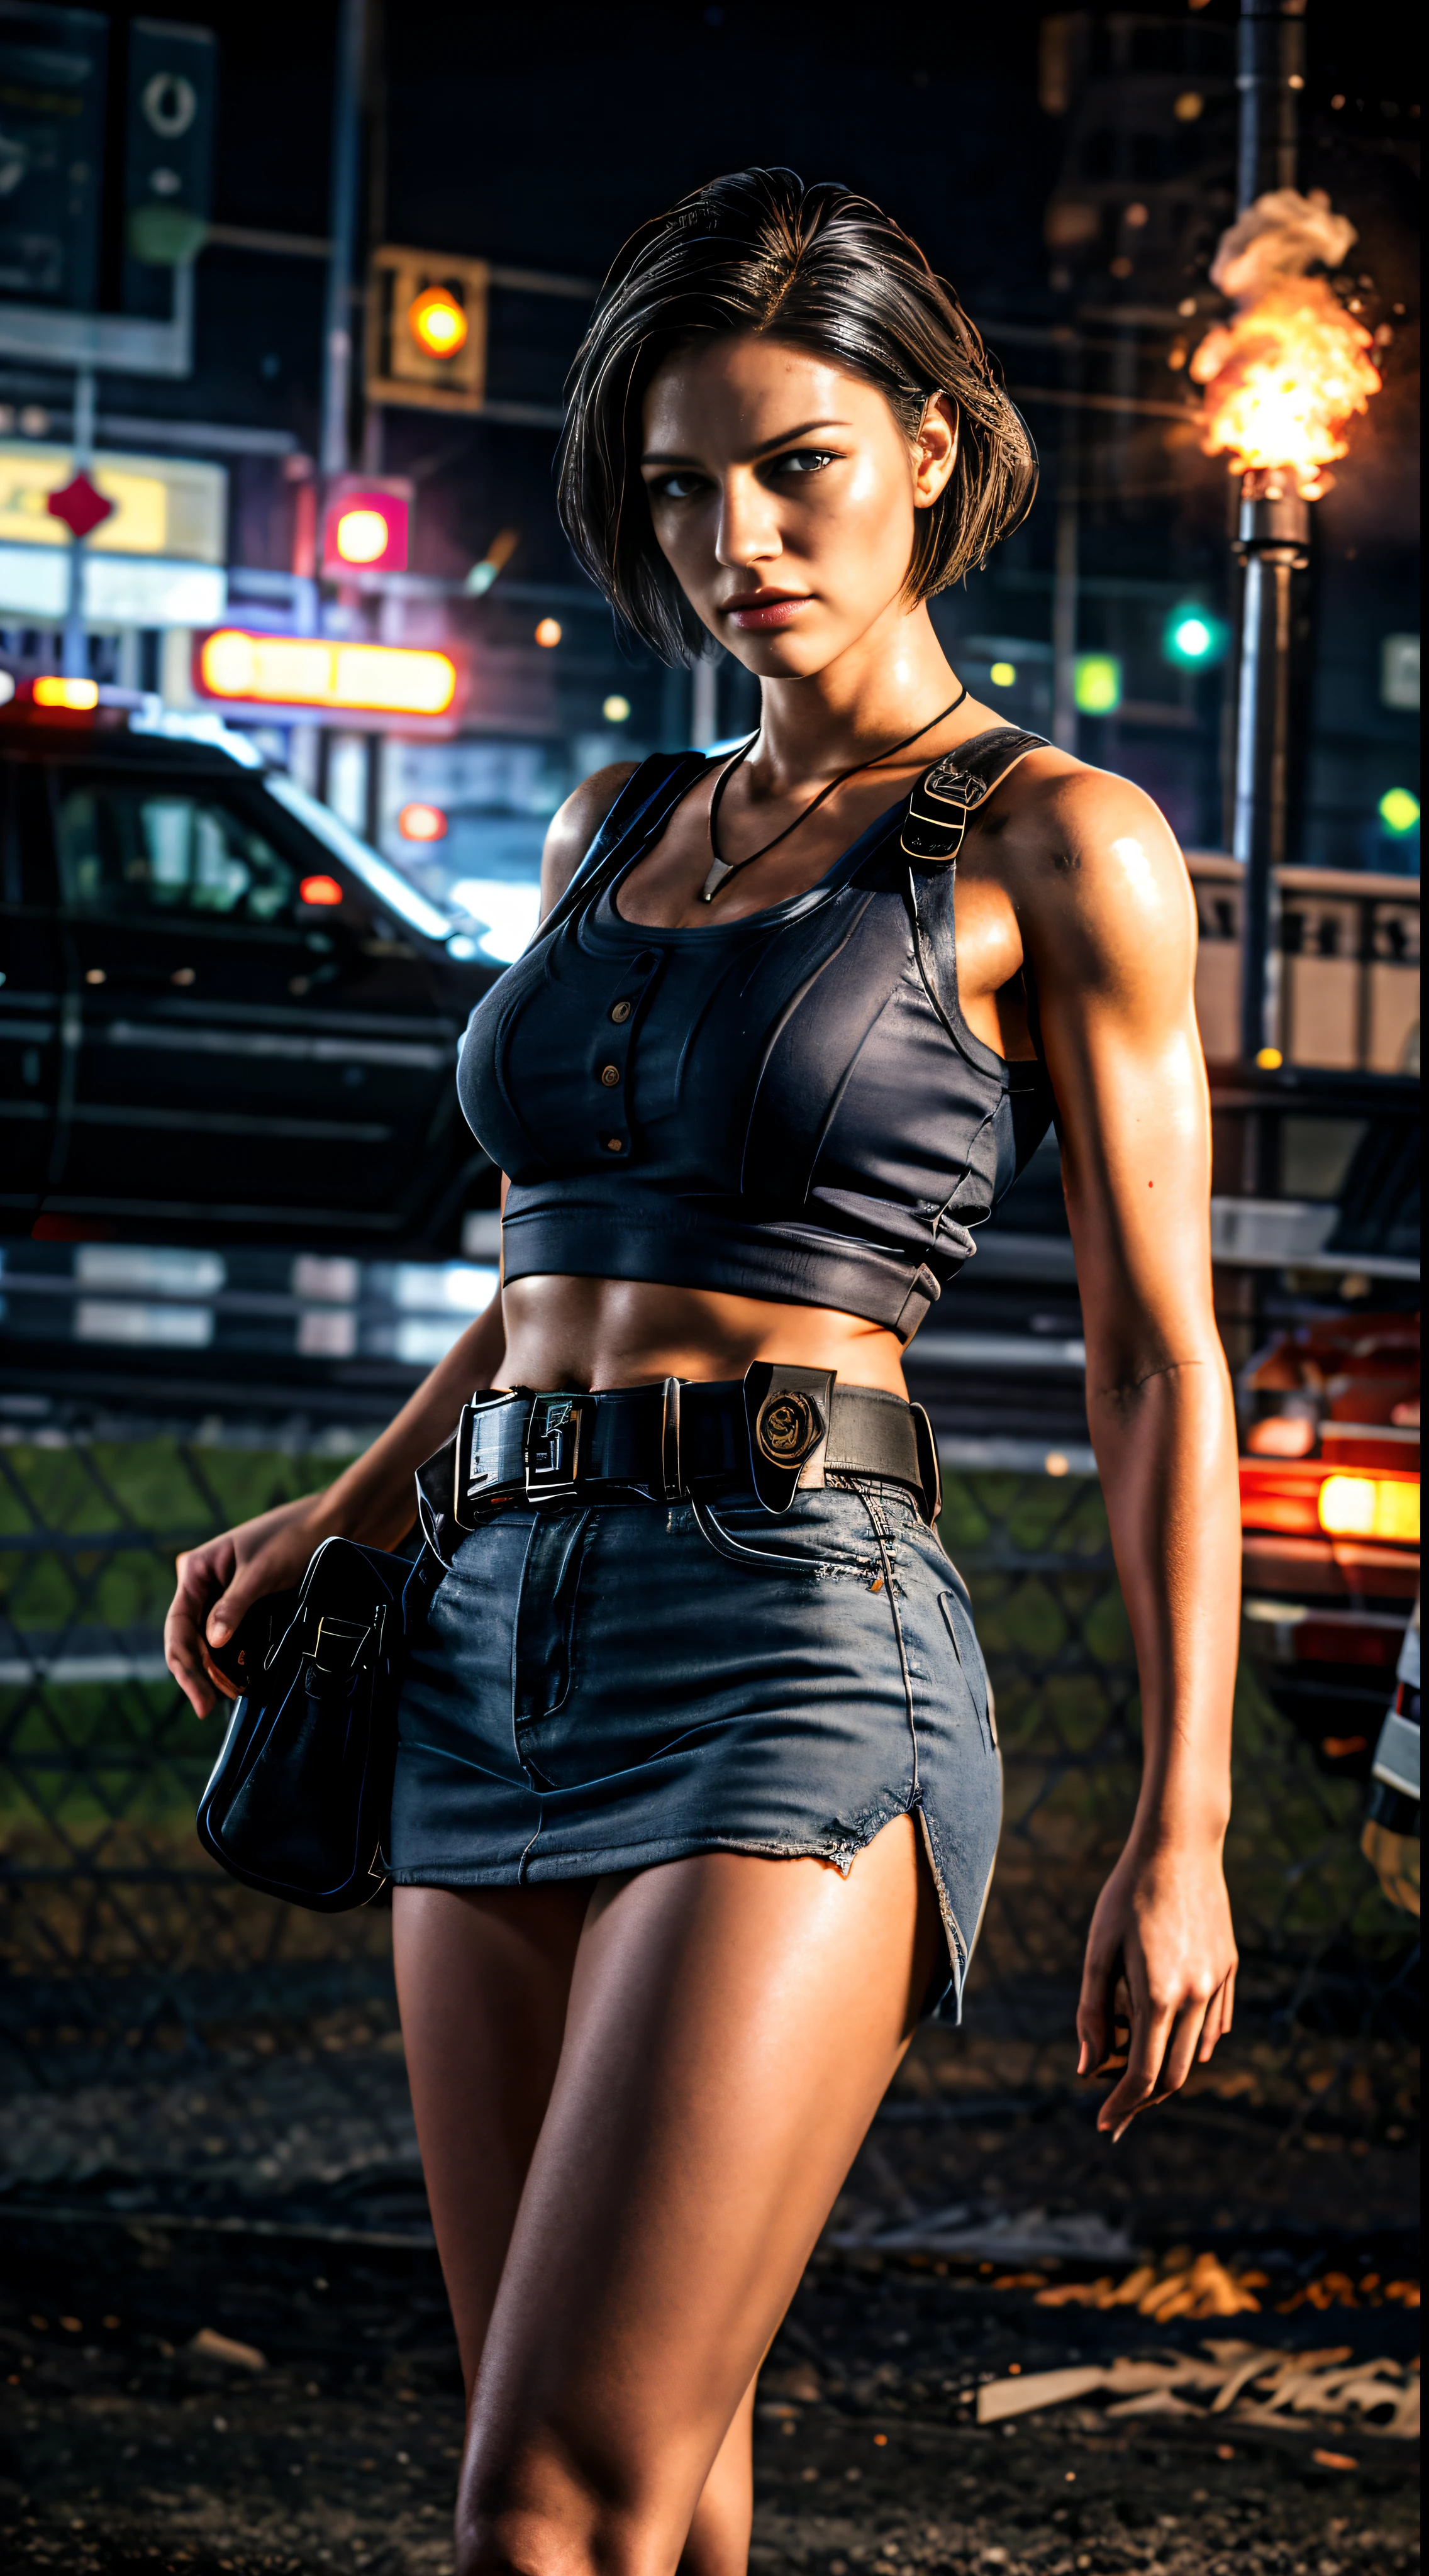 Masterpiece, Best Quality, (Very complex), (realisitic), (A hyper-realistic:1.4), medium full shot, Jill Valentine, police officer_Uniform, ((serious face)), exteriors, ((A ruined city)), ((Hordes of zombies behind)), looking away, ,Fantasy, Jill Valentine, athletic body, flames, holding a handgun, volume,1 Girl, mini-skirt, Tank Top, volumetric light, dramatic fireworks, looking up at viewer